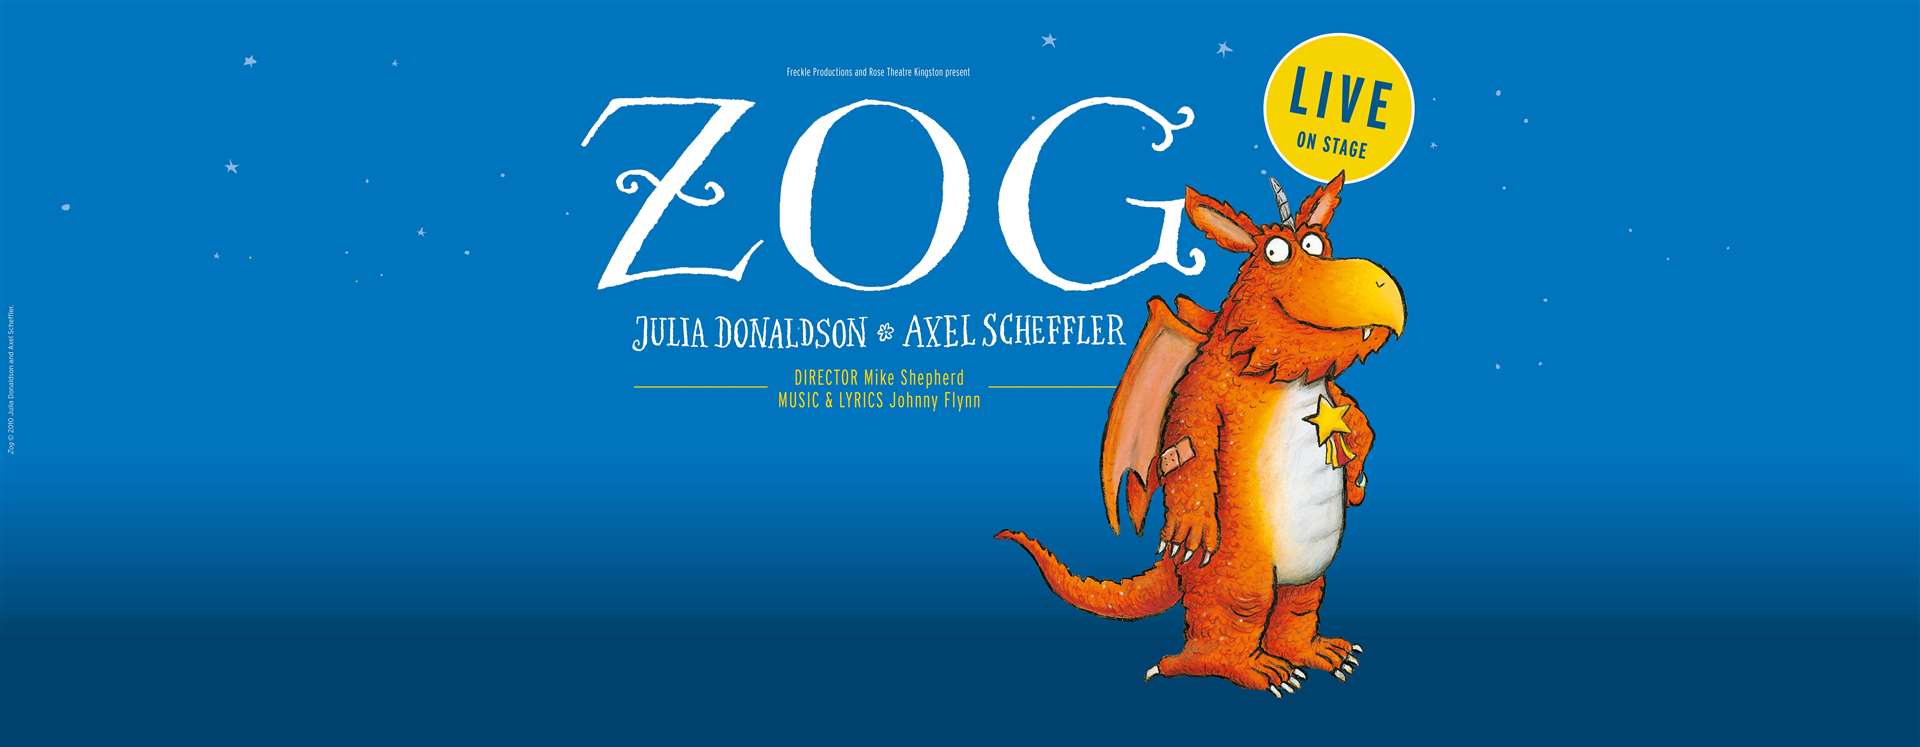 Zog takes place at Eden Court, Inverness, July 12-14.